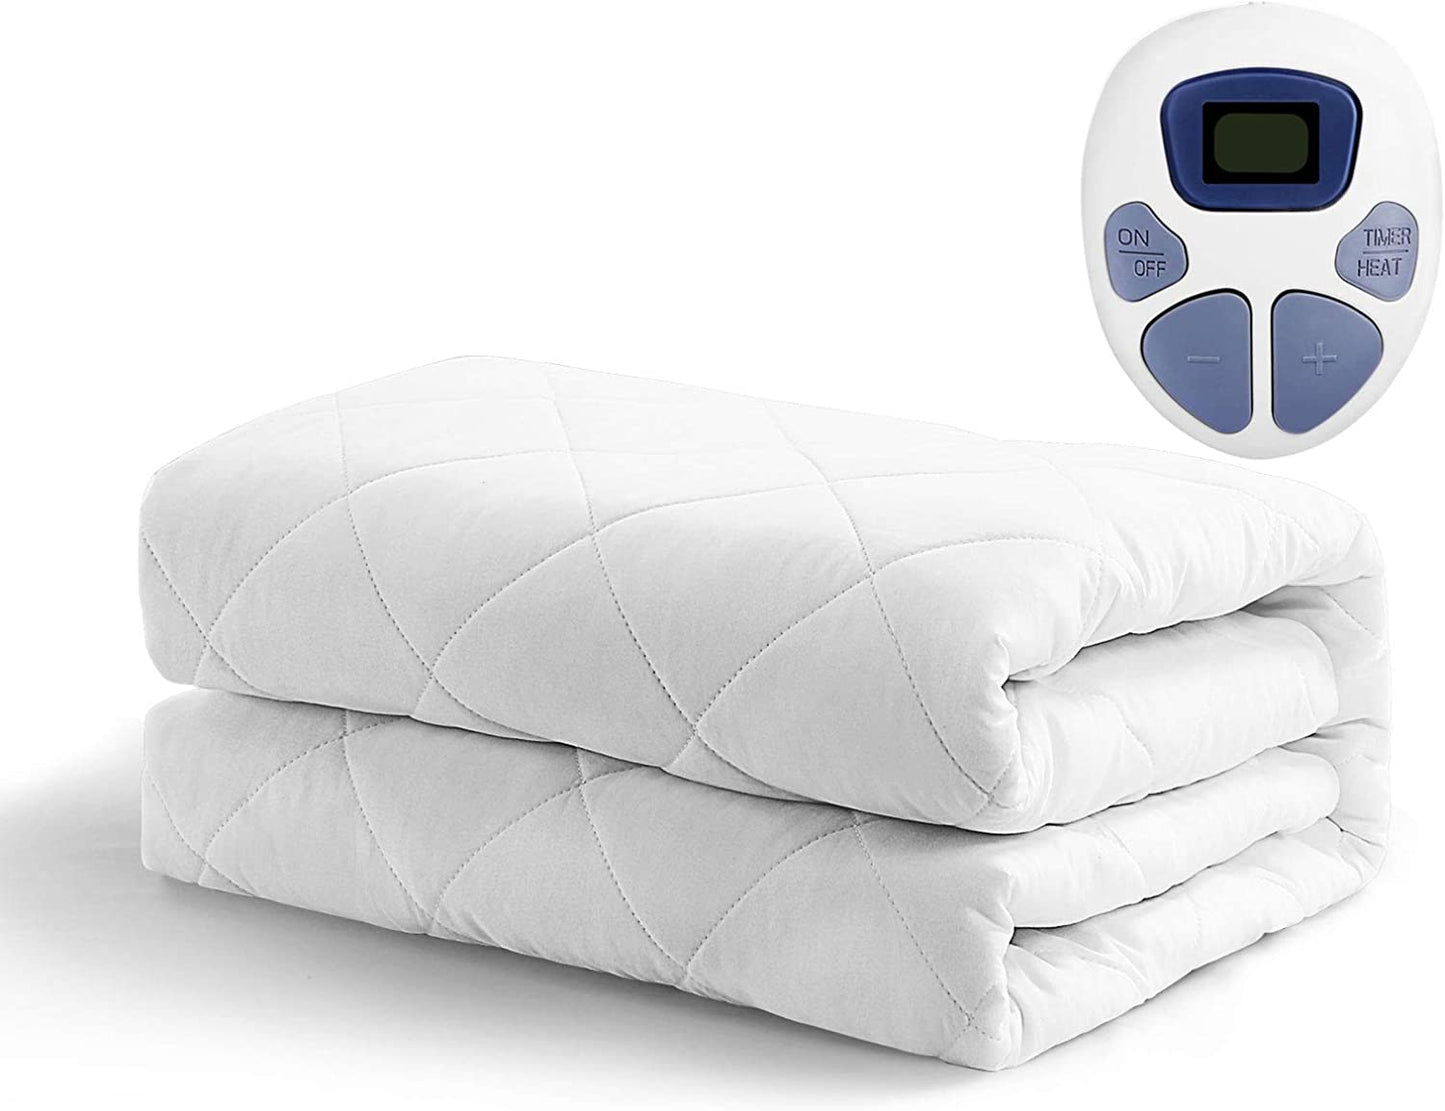 MAEVIS Heated Mattress Pad Dual Control King Size All Season,10 Heat Setting,Quilted Electric Mattress Pads Fit up to 15" with 1-12 Hours Auto Shut off (White, King(78"X80"))